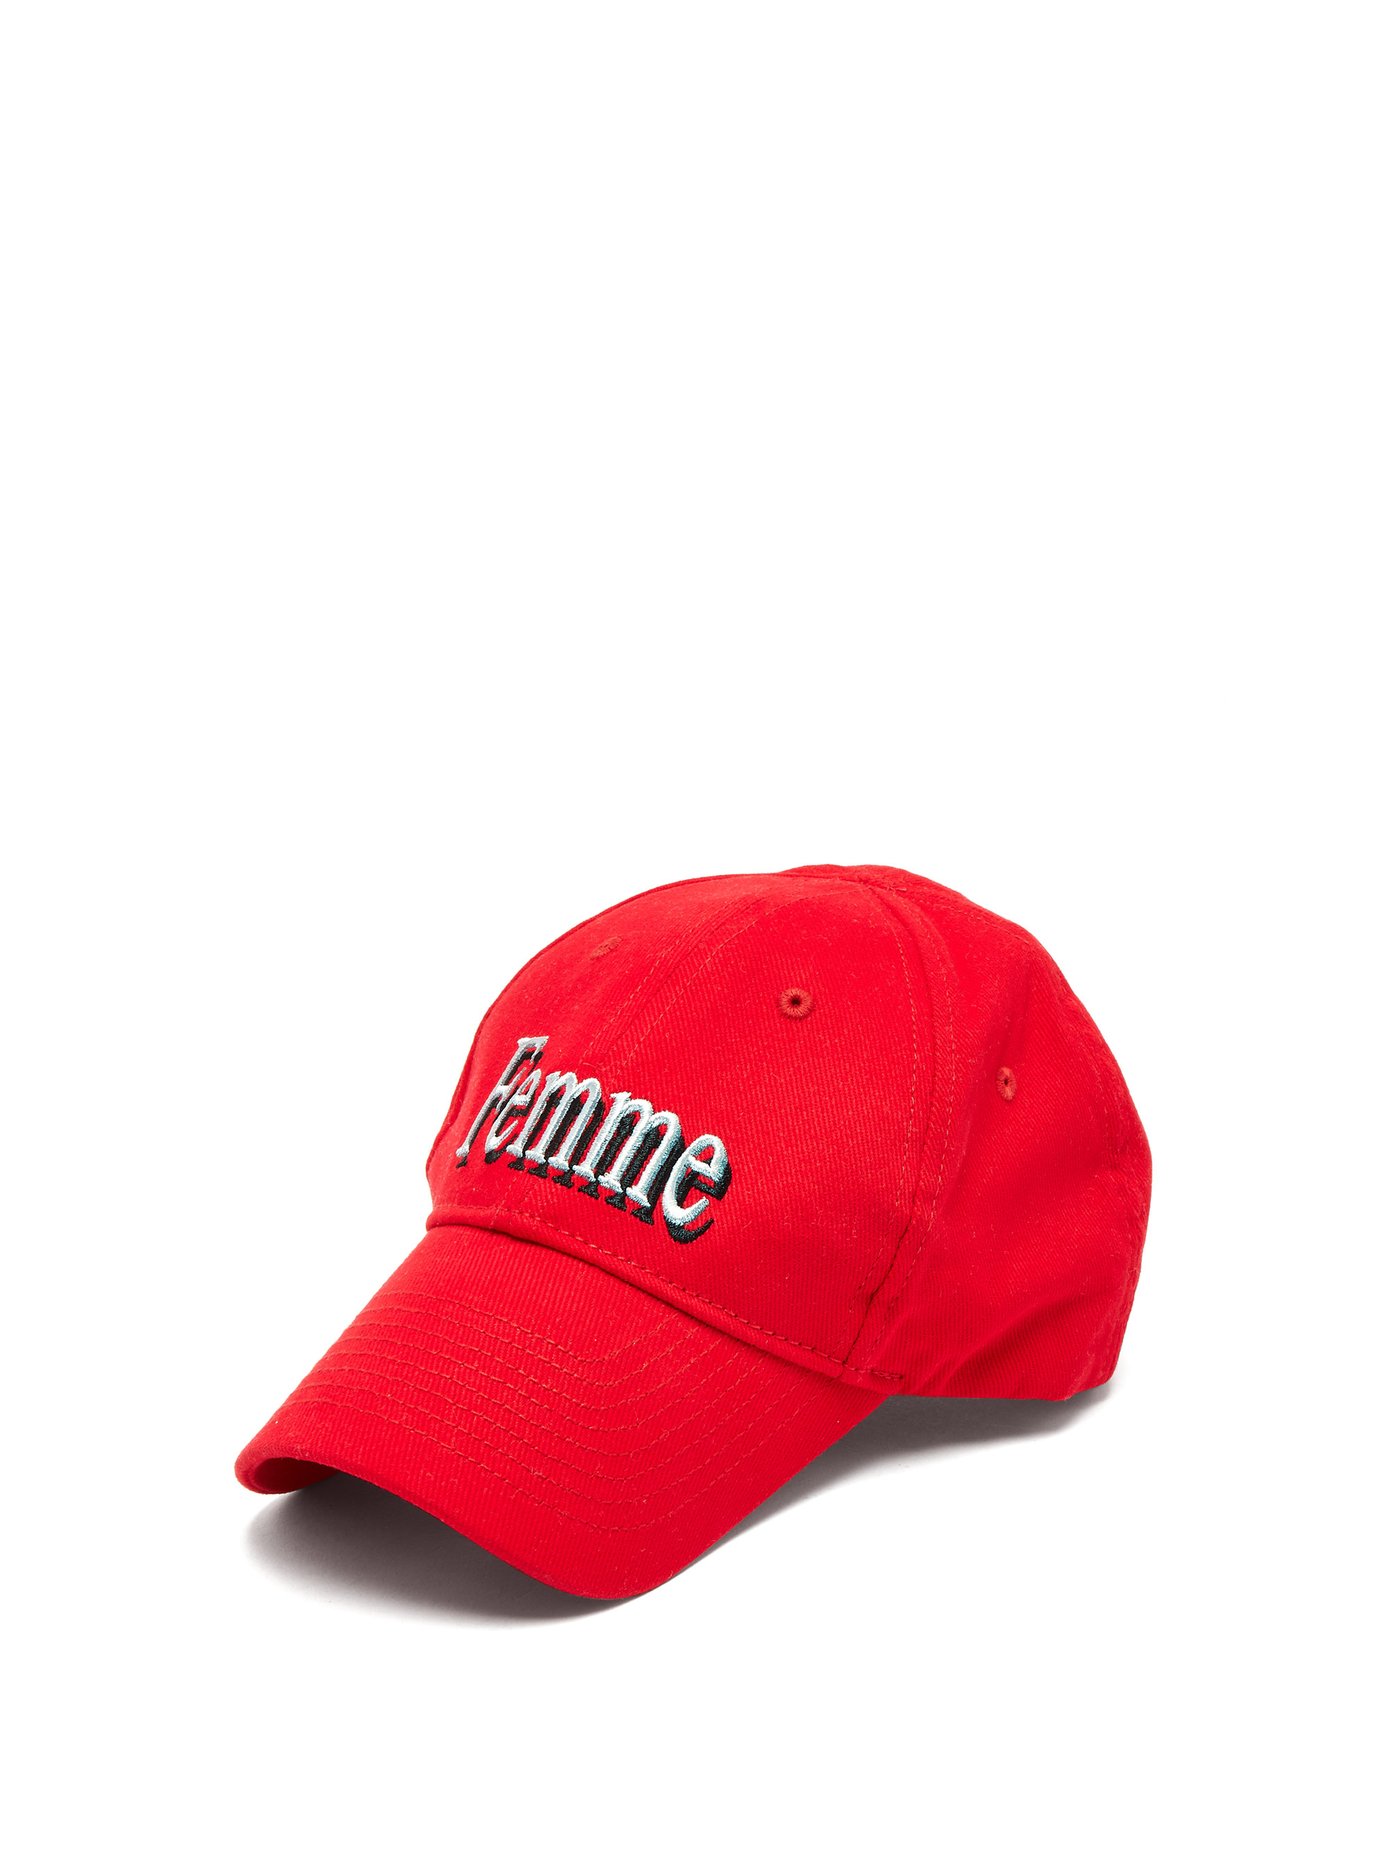 Femme-embroidered cotton cap 